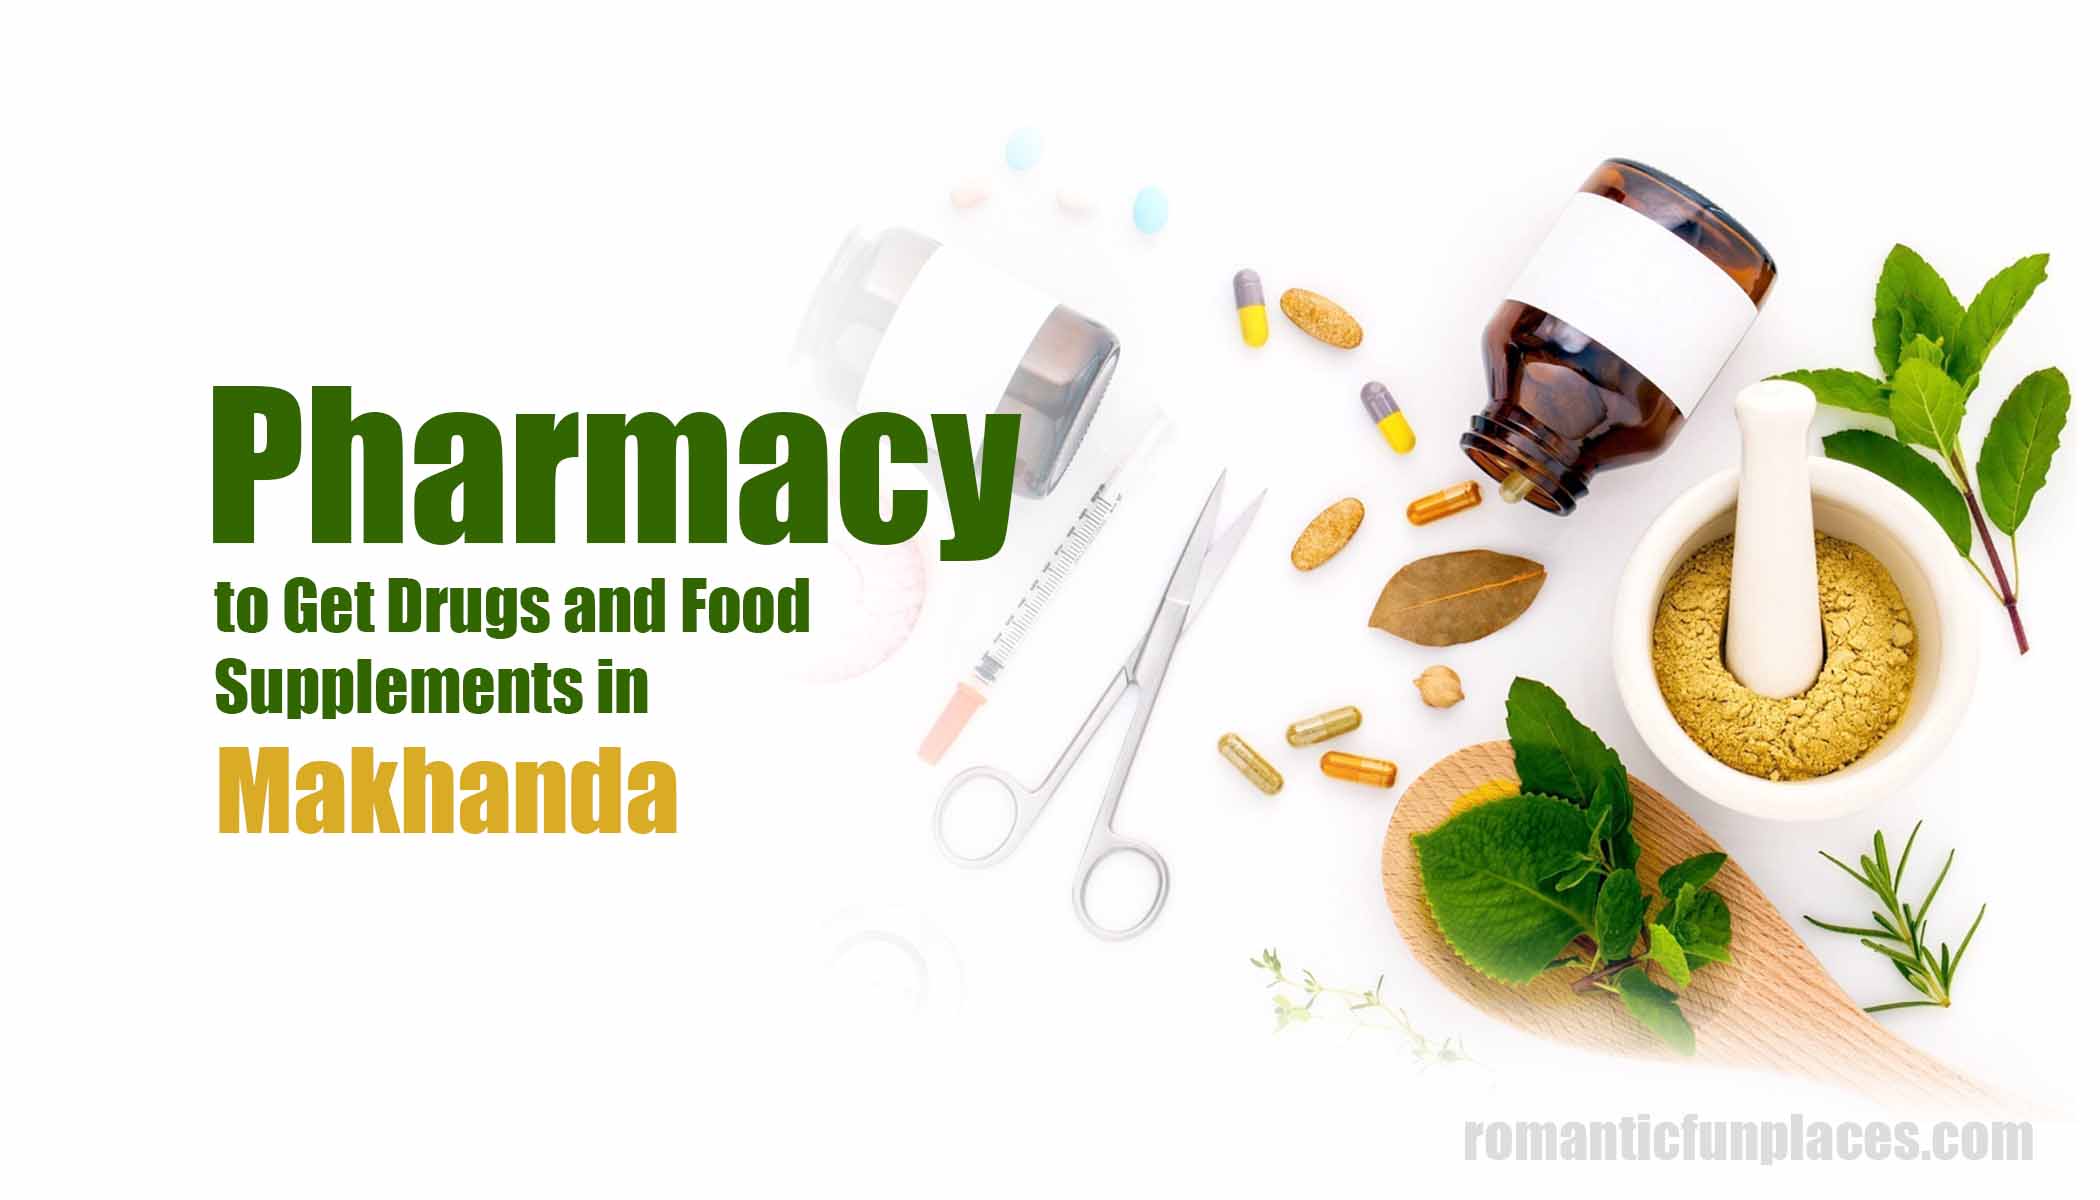 Pharmacy to Get Drugs and Food Supplements In Makhanda